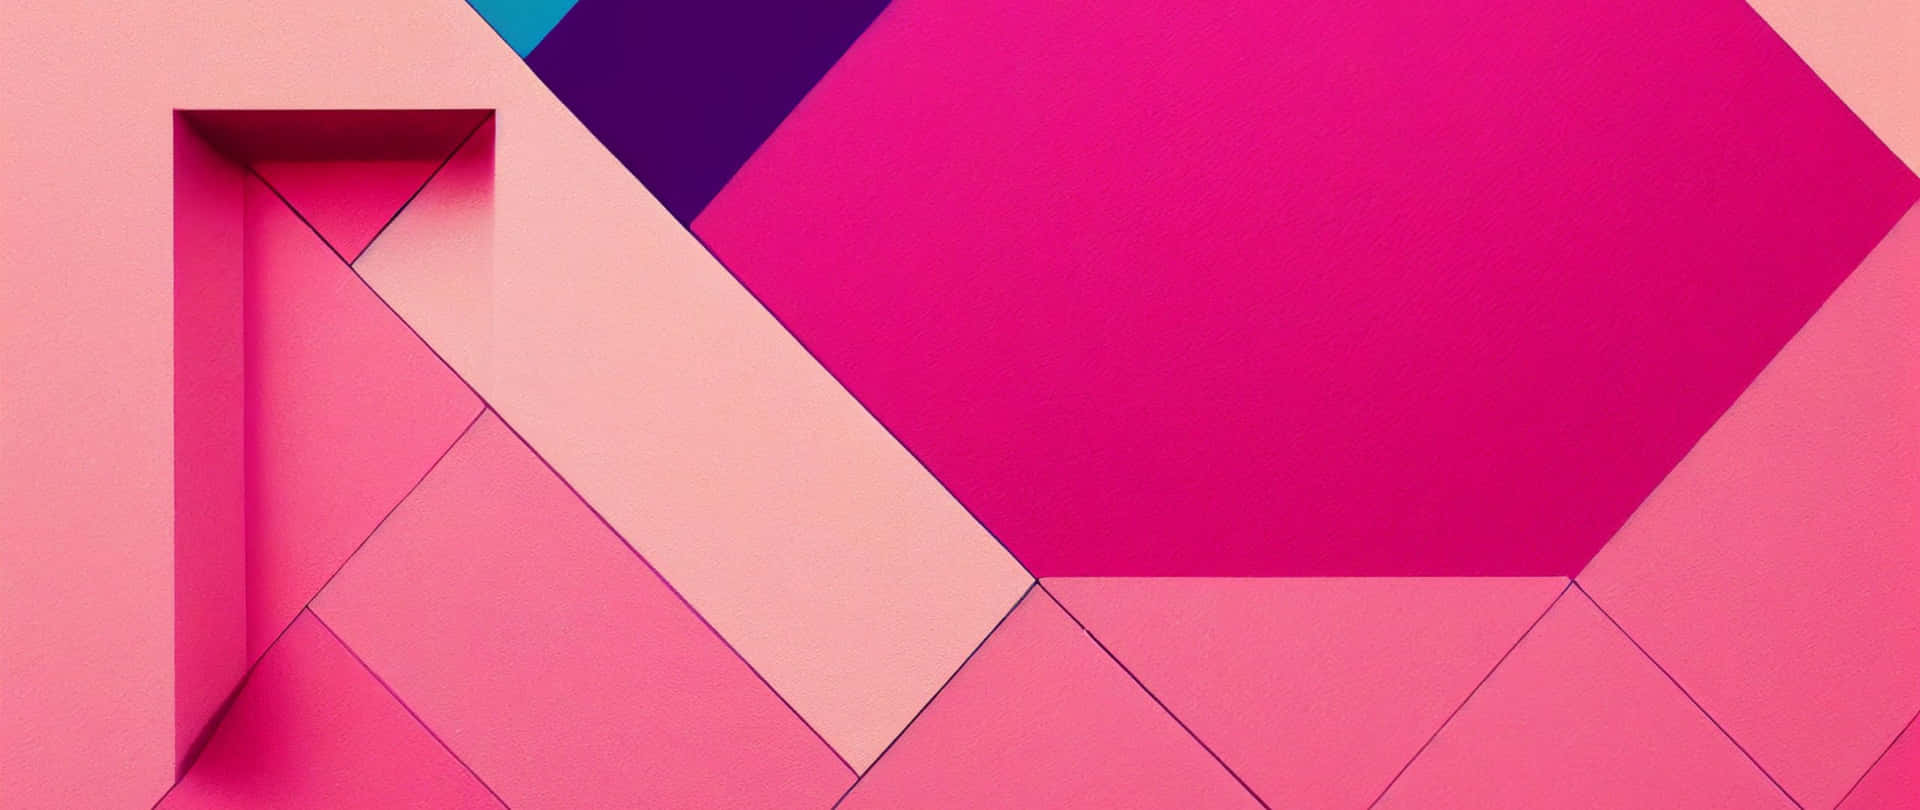 A Pink And Purple Geometric Wall With A Door